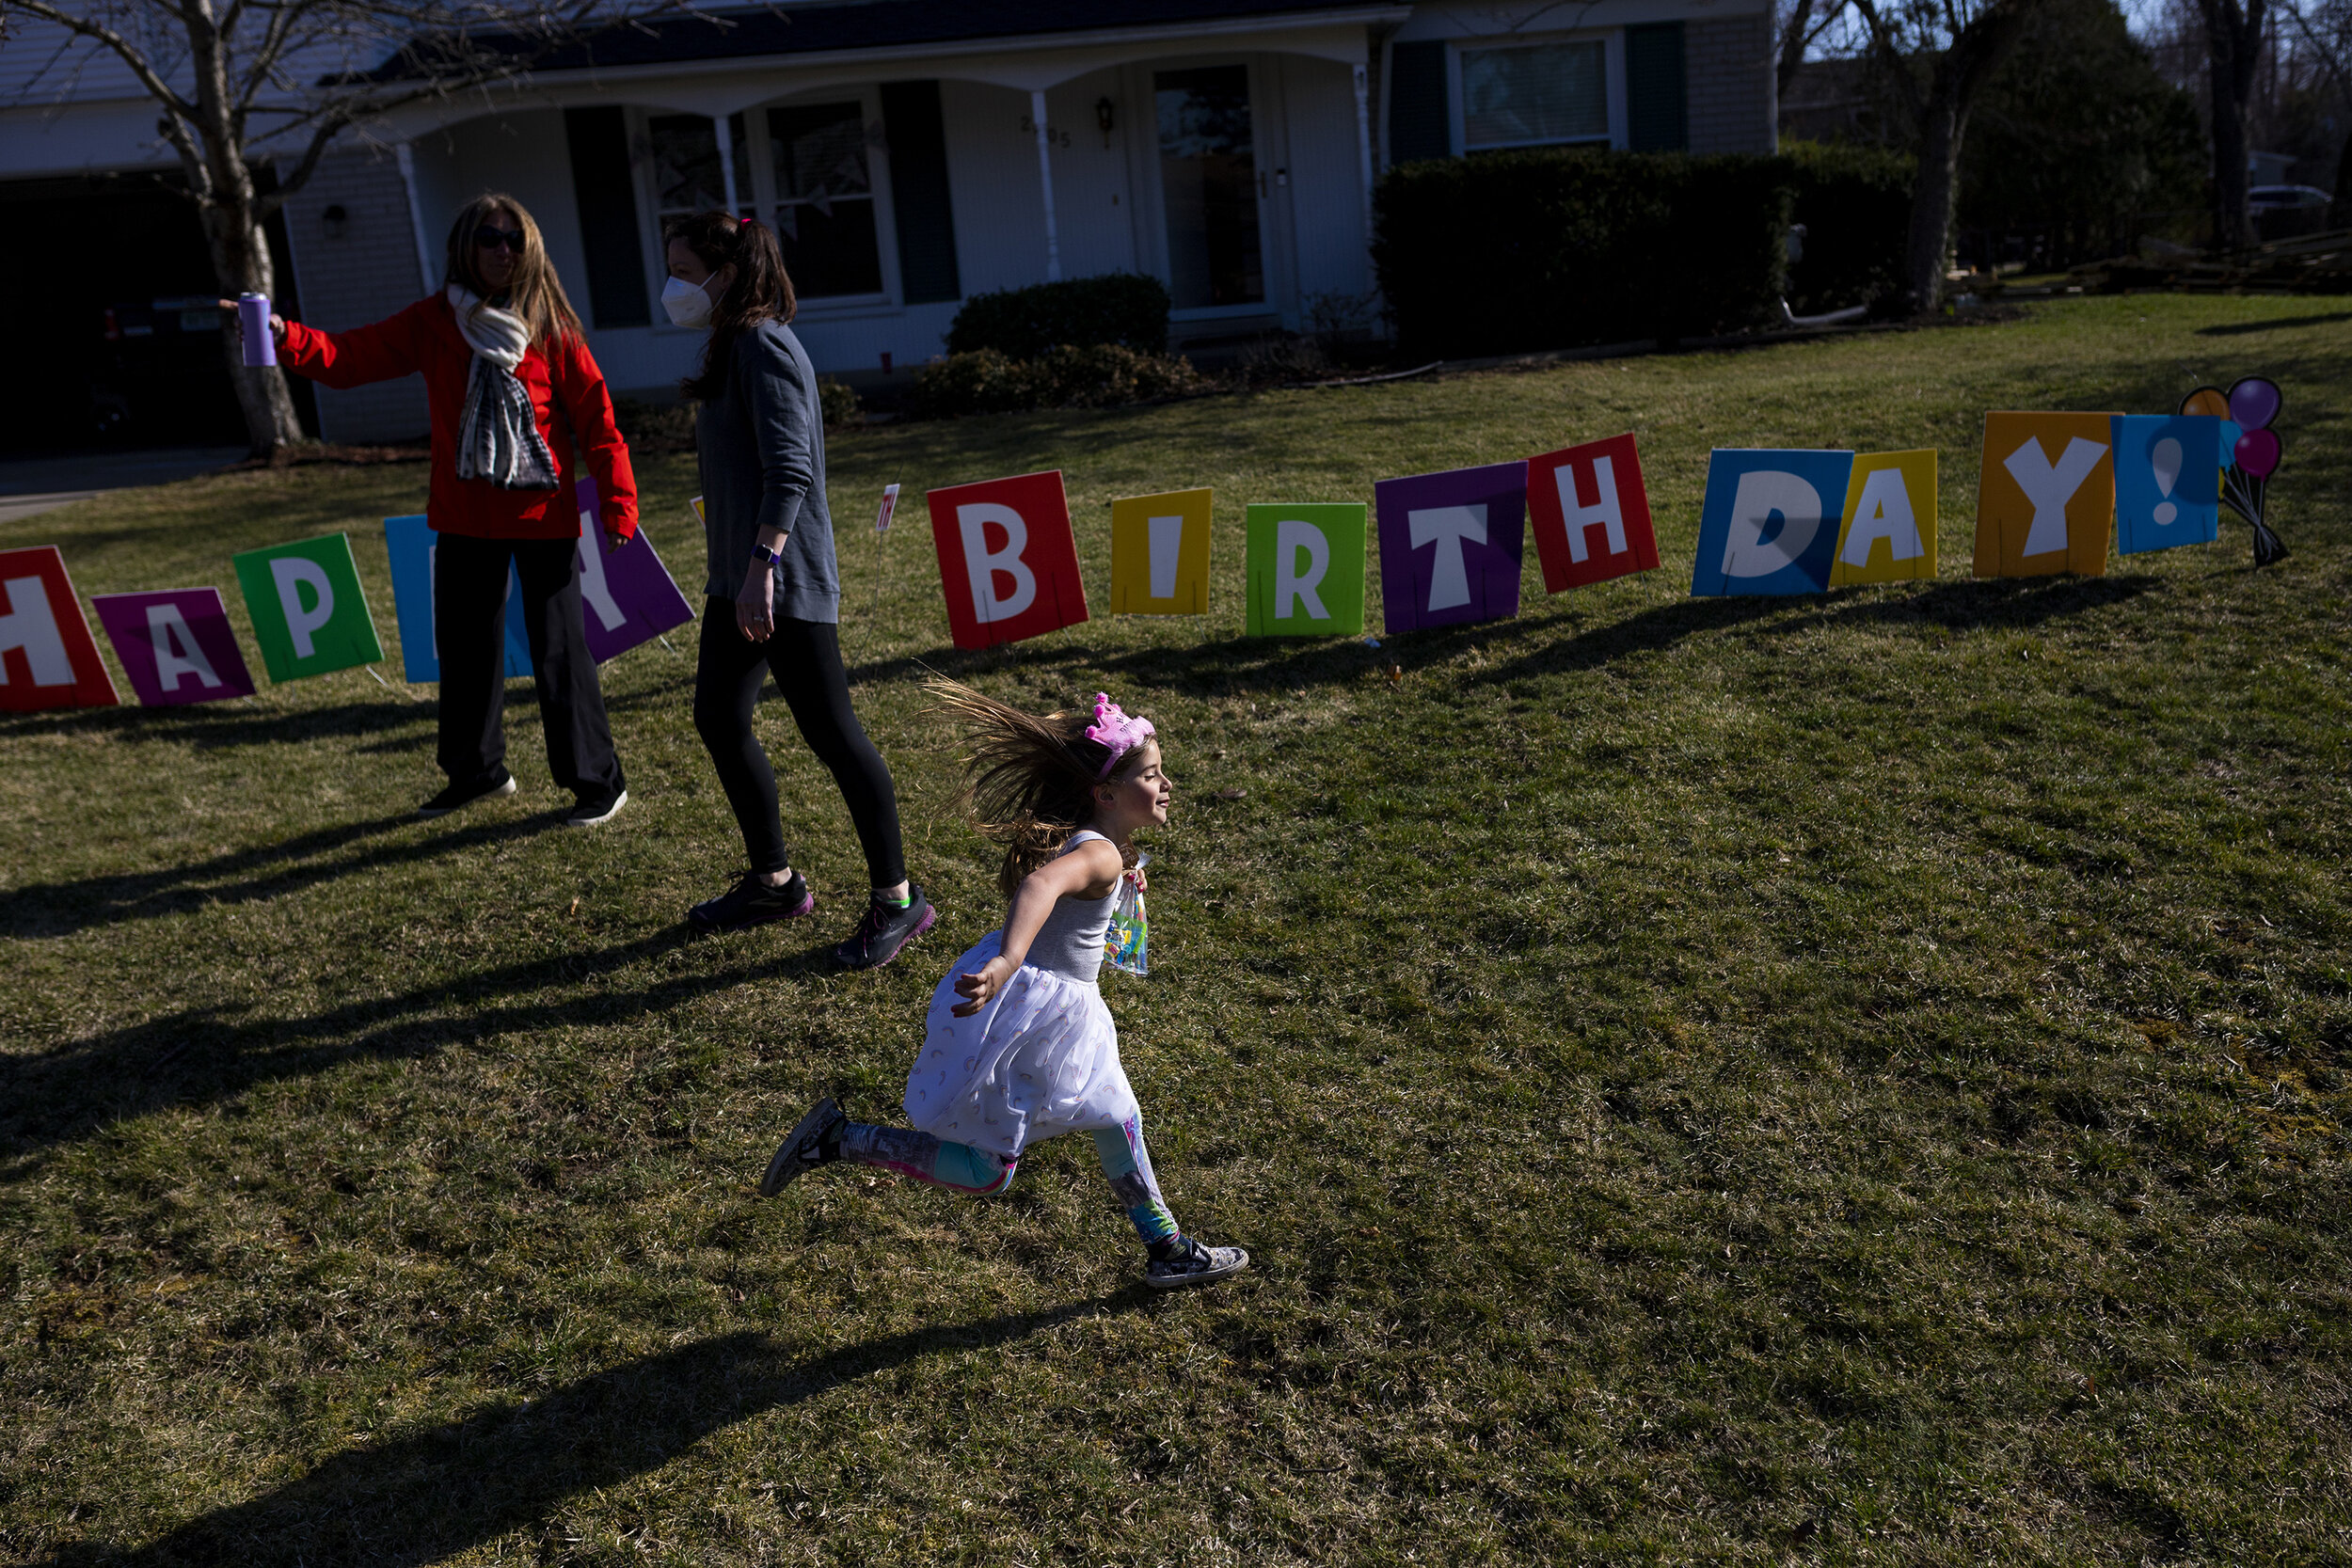  Bella Vernon, 6, runs through her front-yard on during her birthday celebrations on Monday, March 29, 2021, in Troy. 